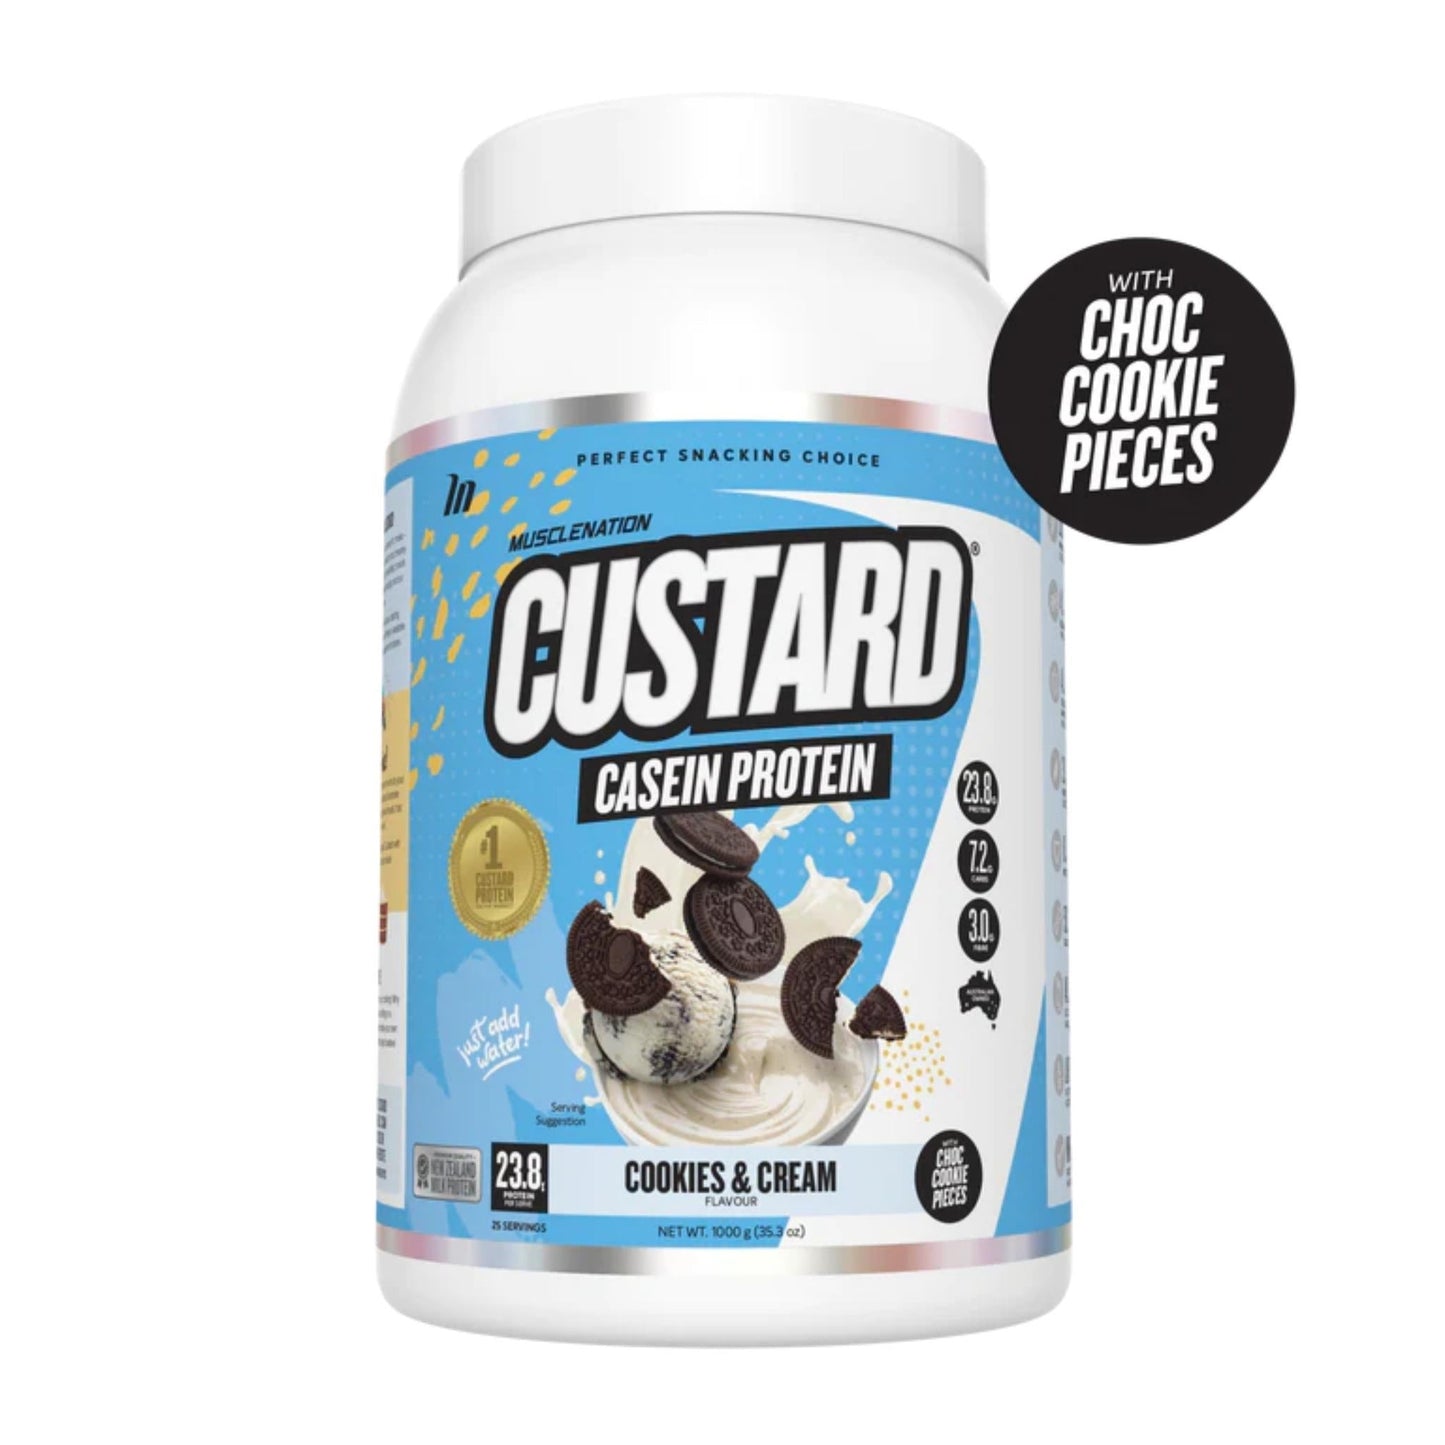 Muscle Nation - Custard Casein Protein - Supplements - Cookies & Cream - The Cave Gym